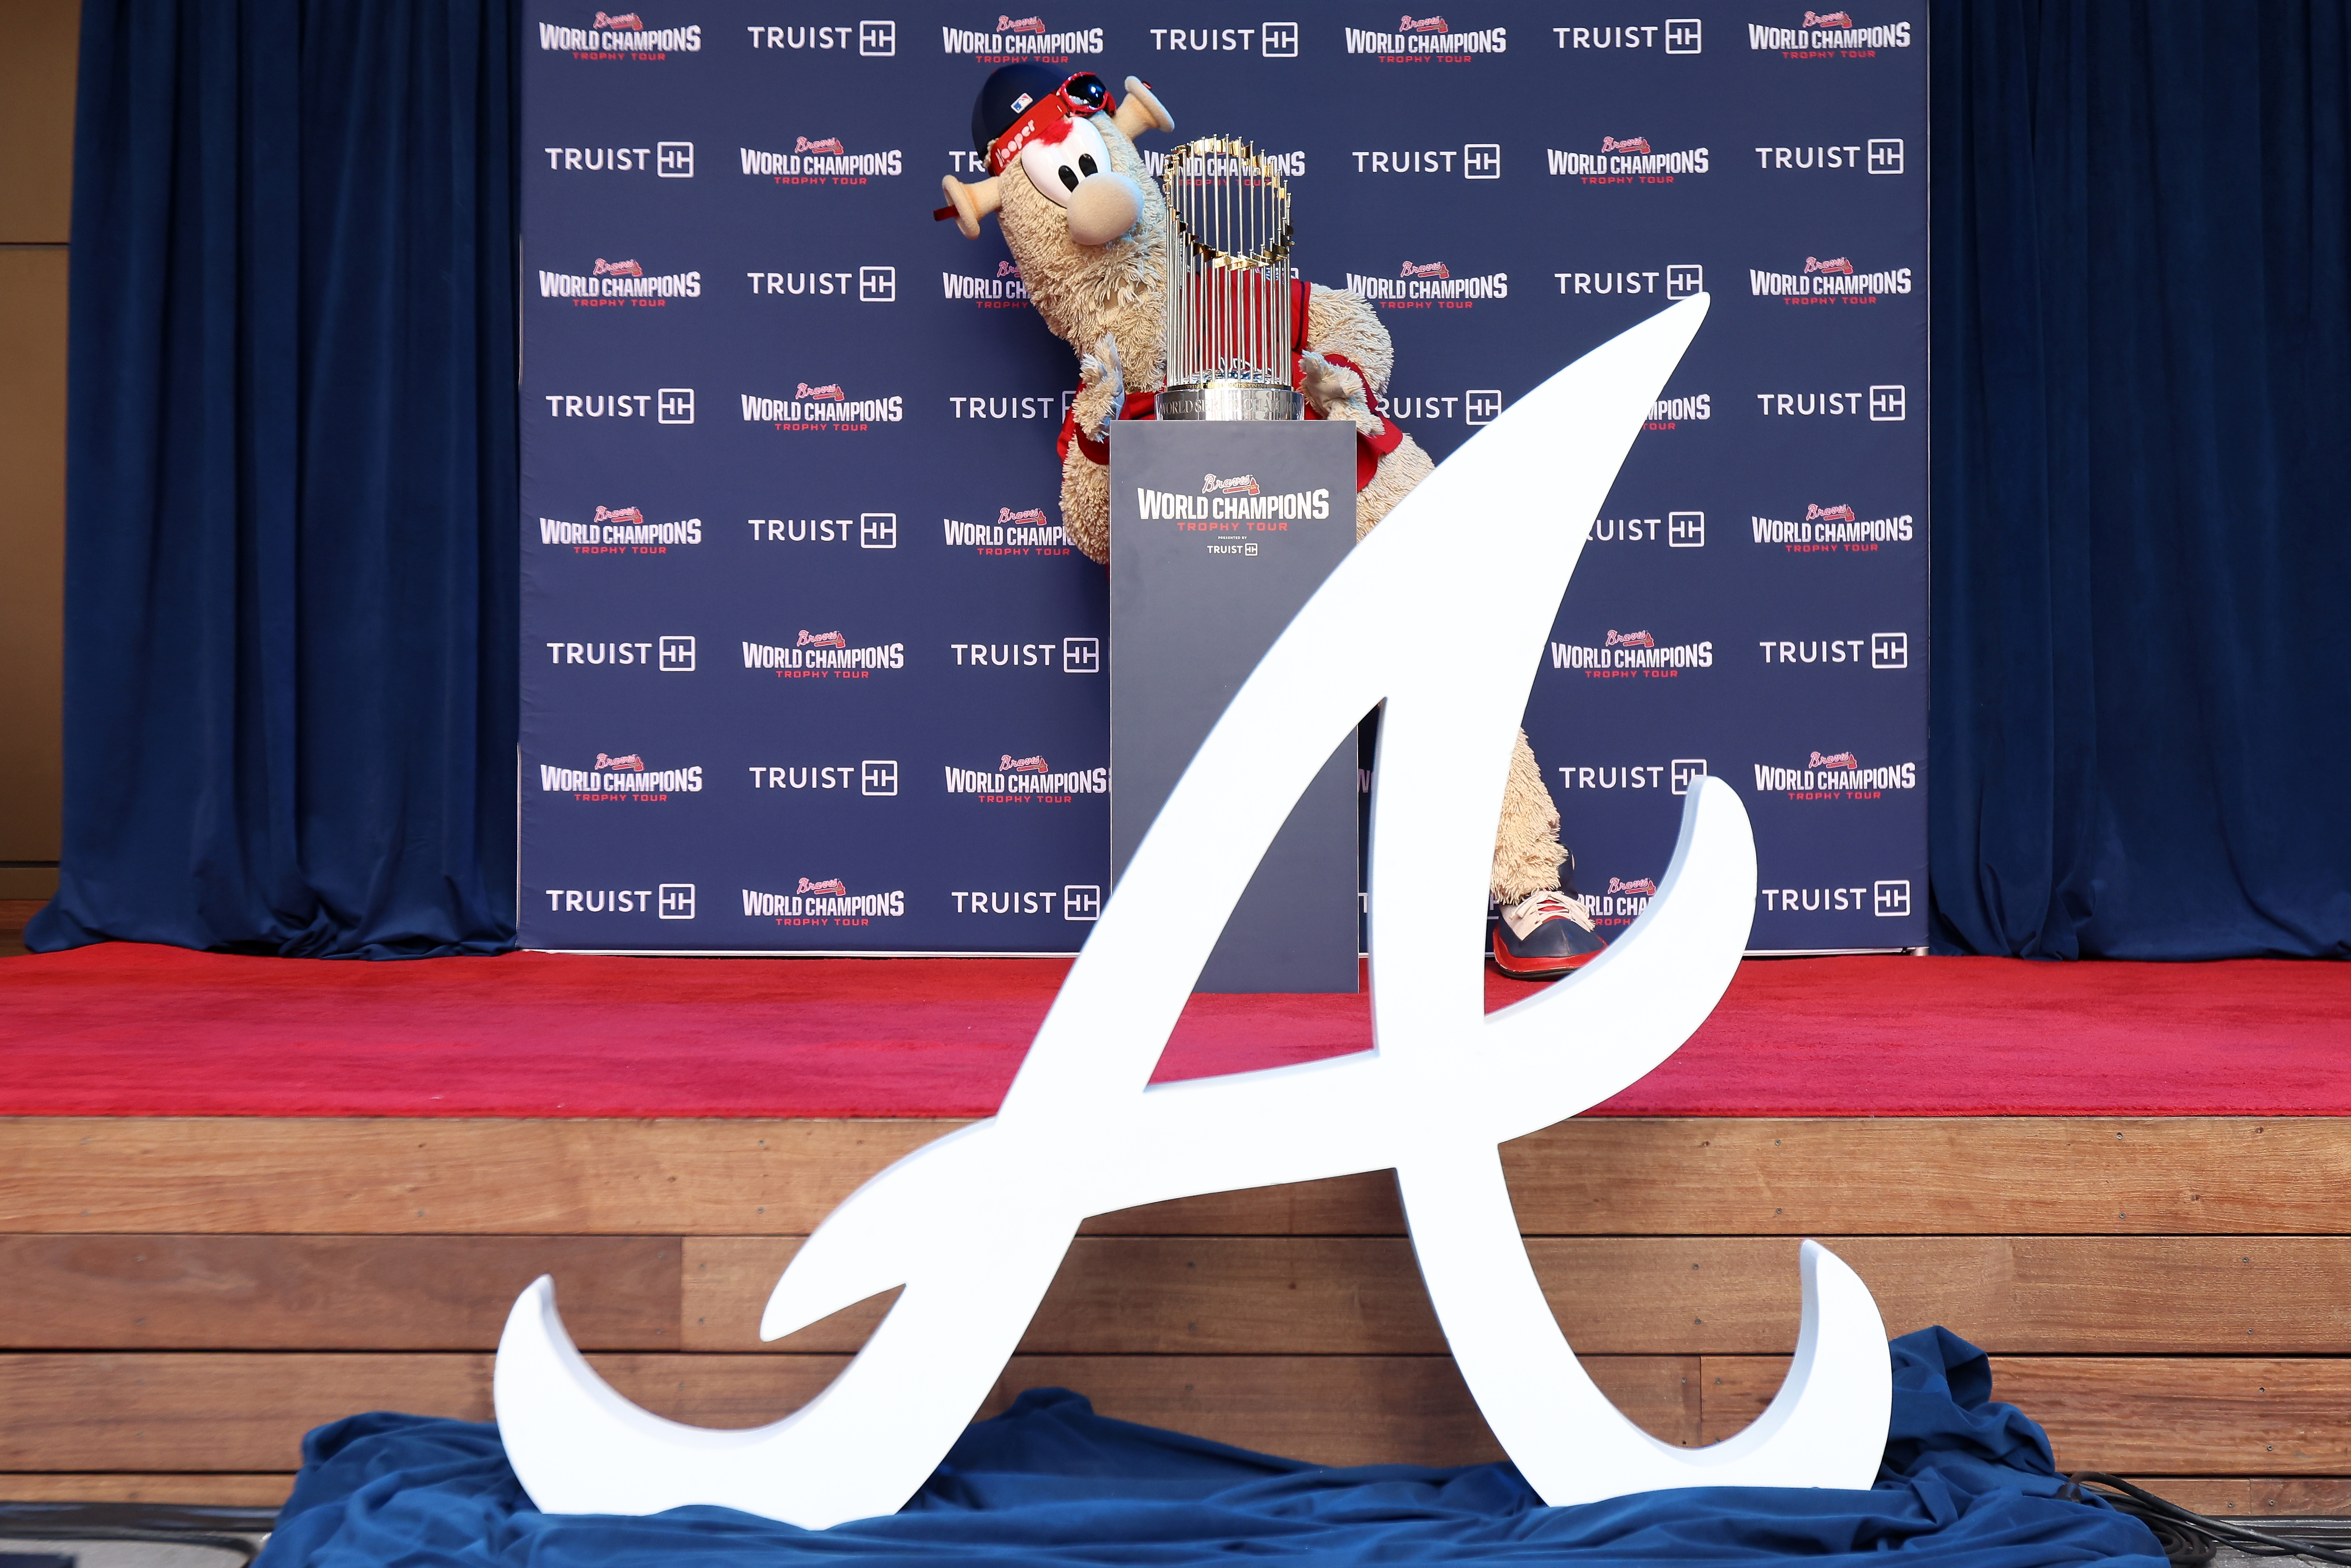 Braves World Series Championship Trophy tour makes stop in Americus -  Americus Times-Recorder